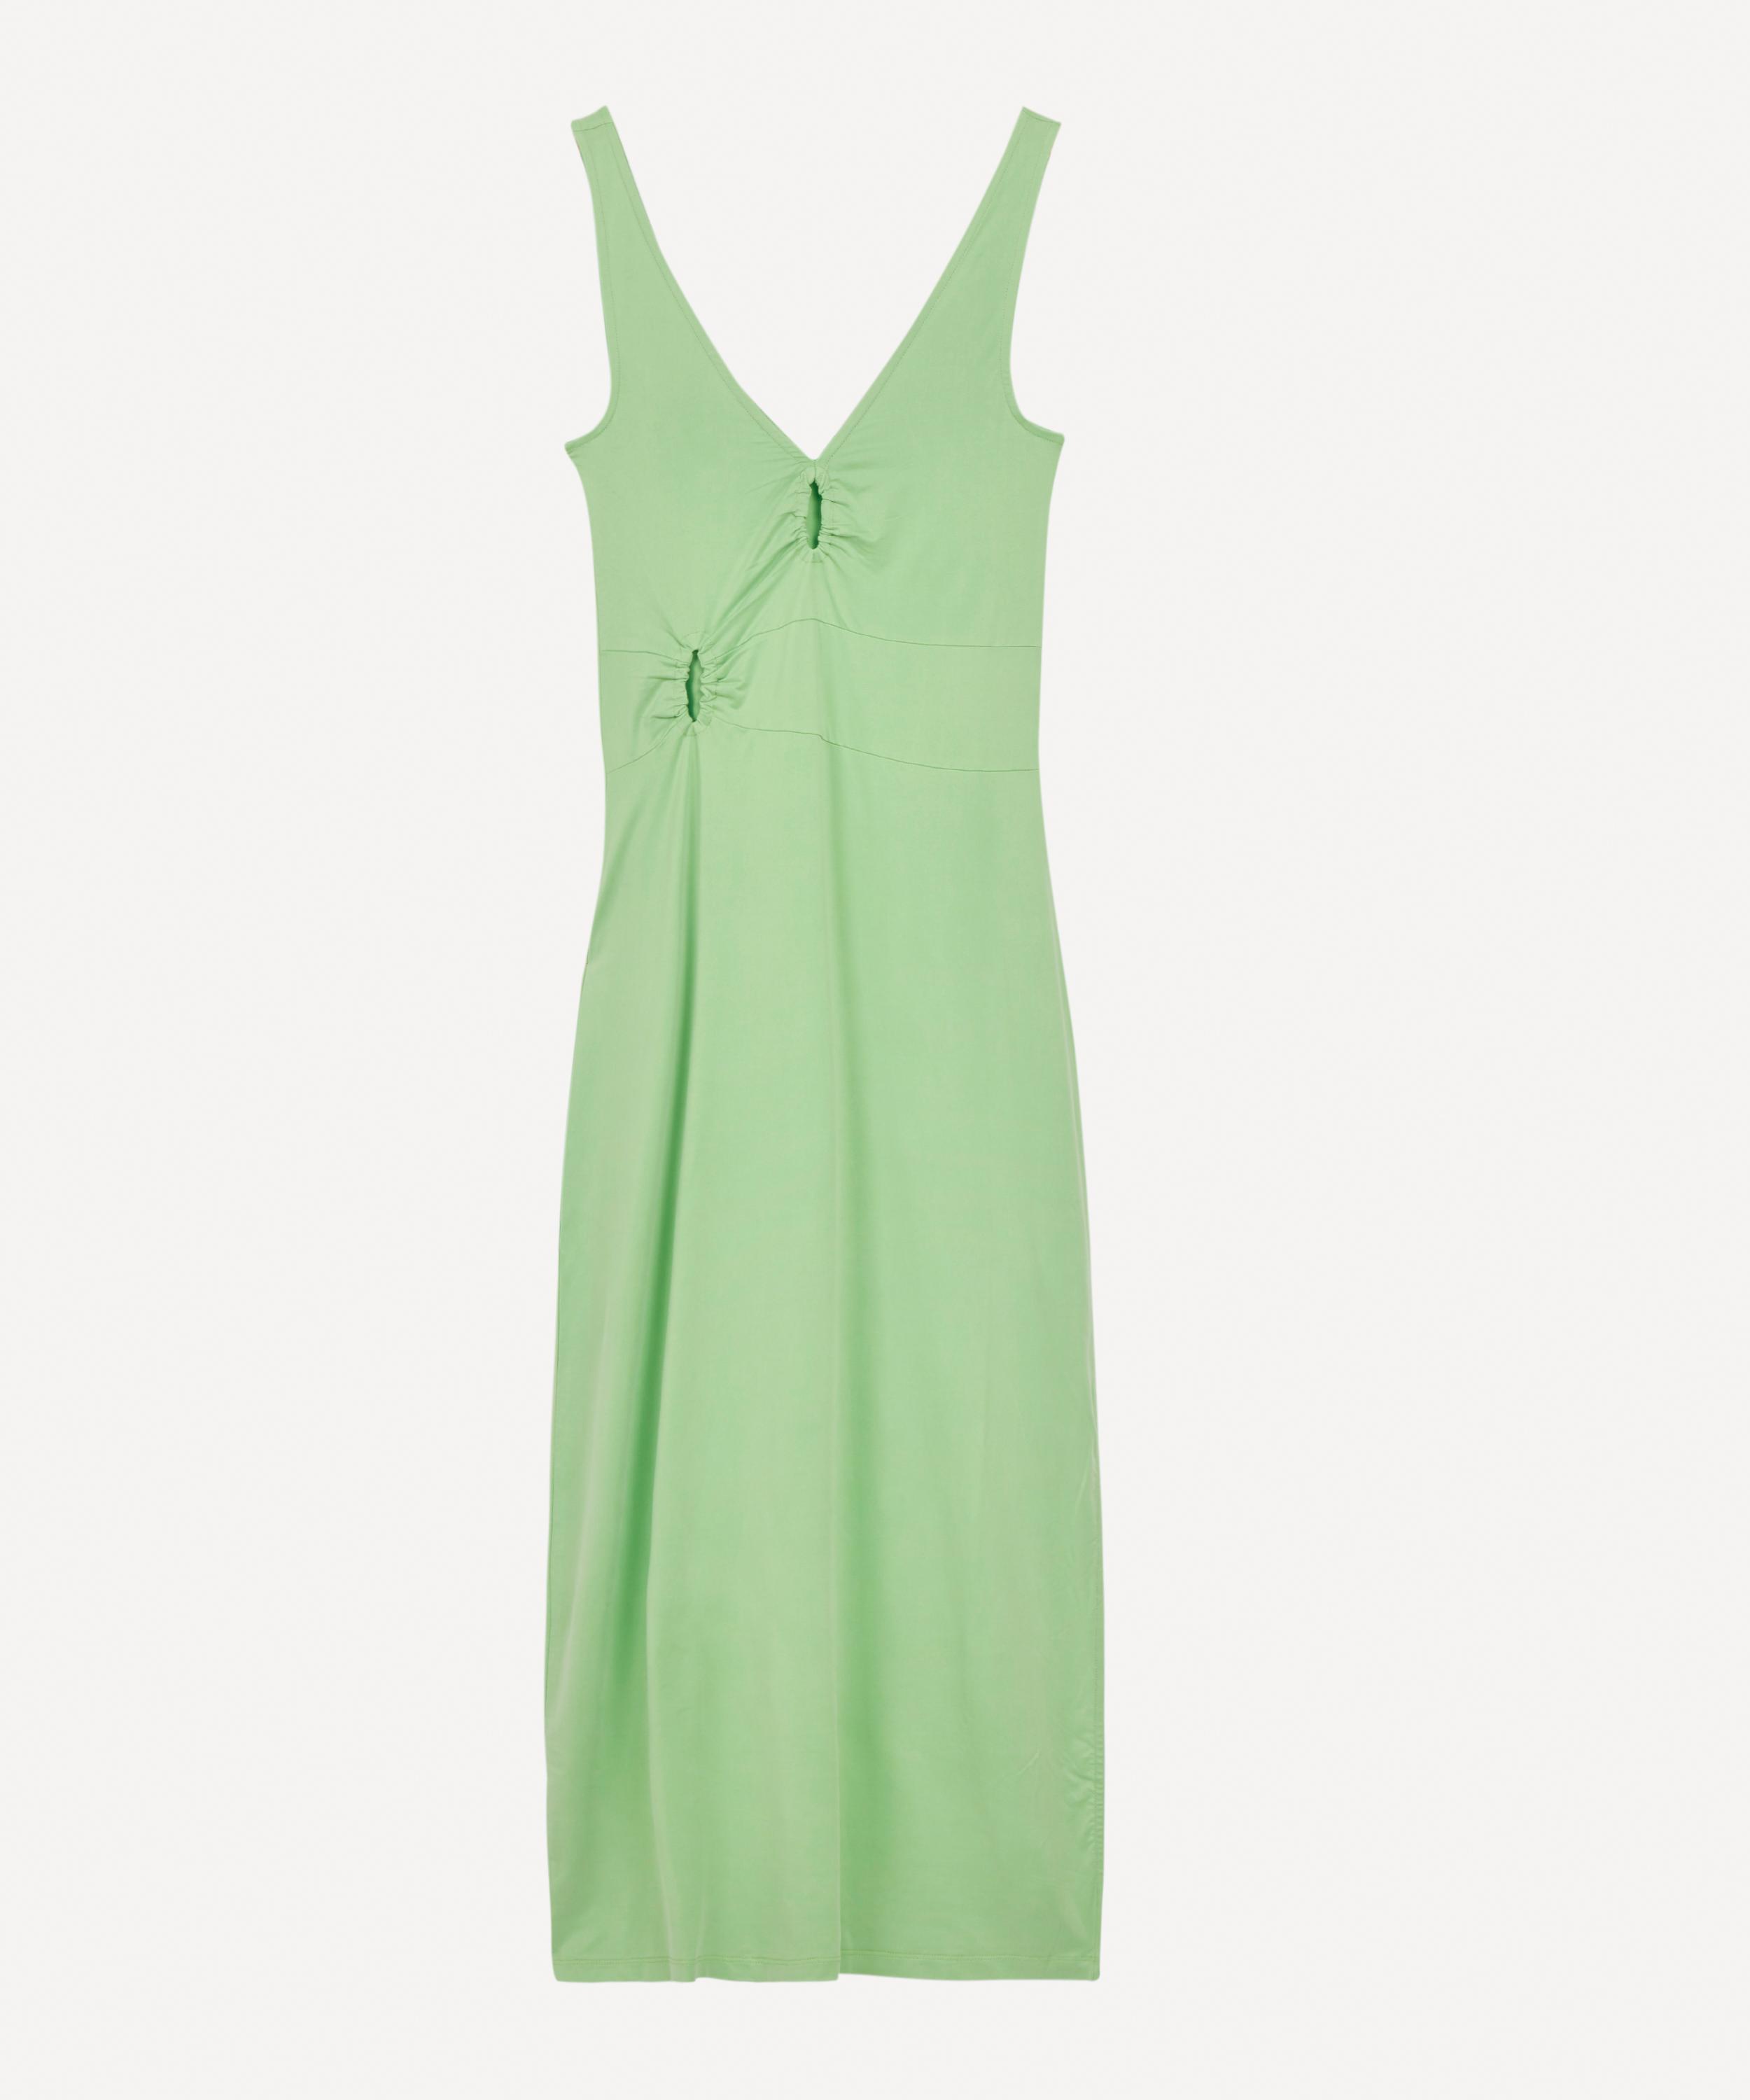 Paloma Wool Wool Nelly Cut-out Dress in Green | Lyst Canada